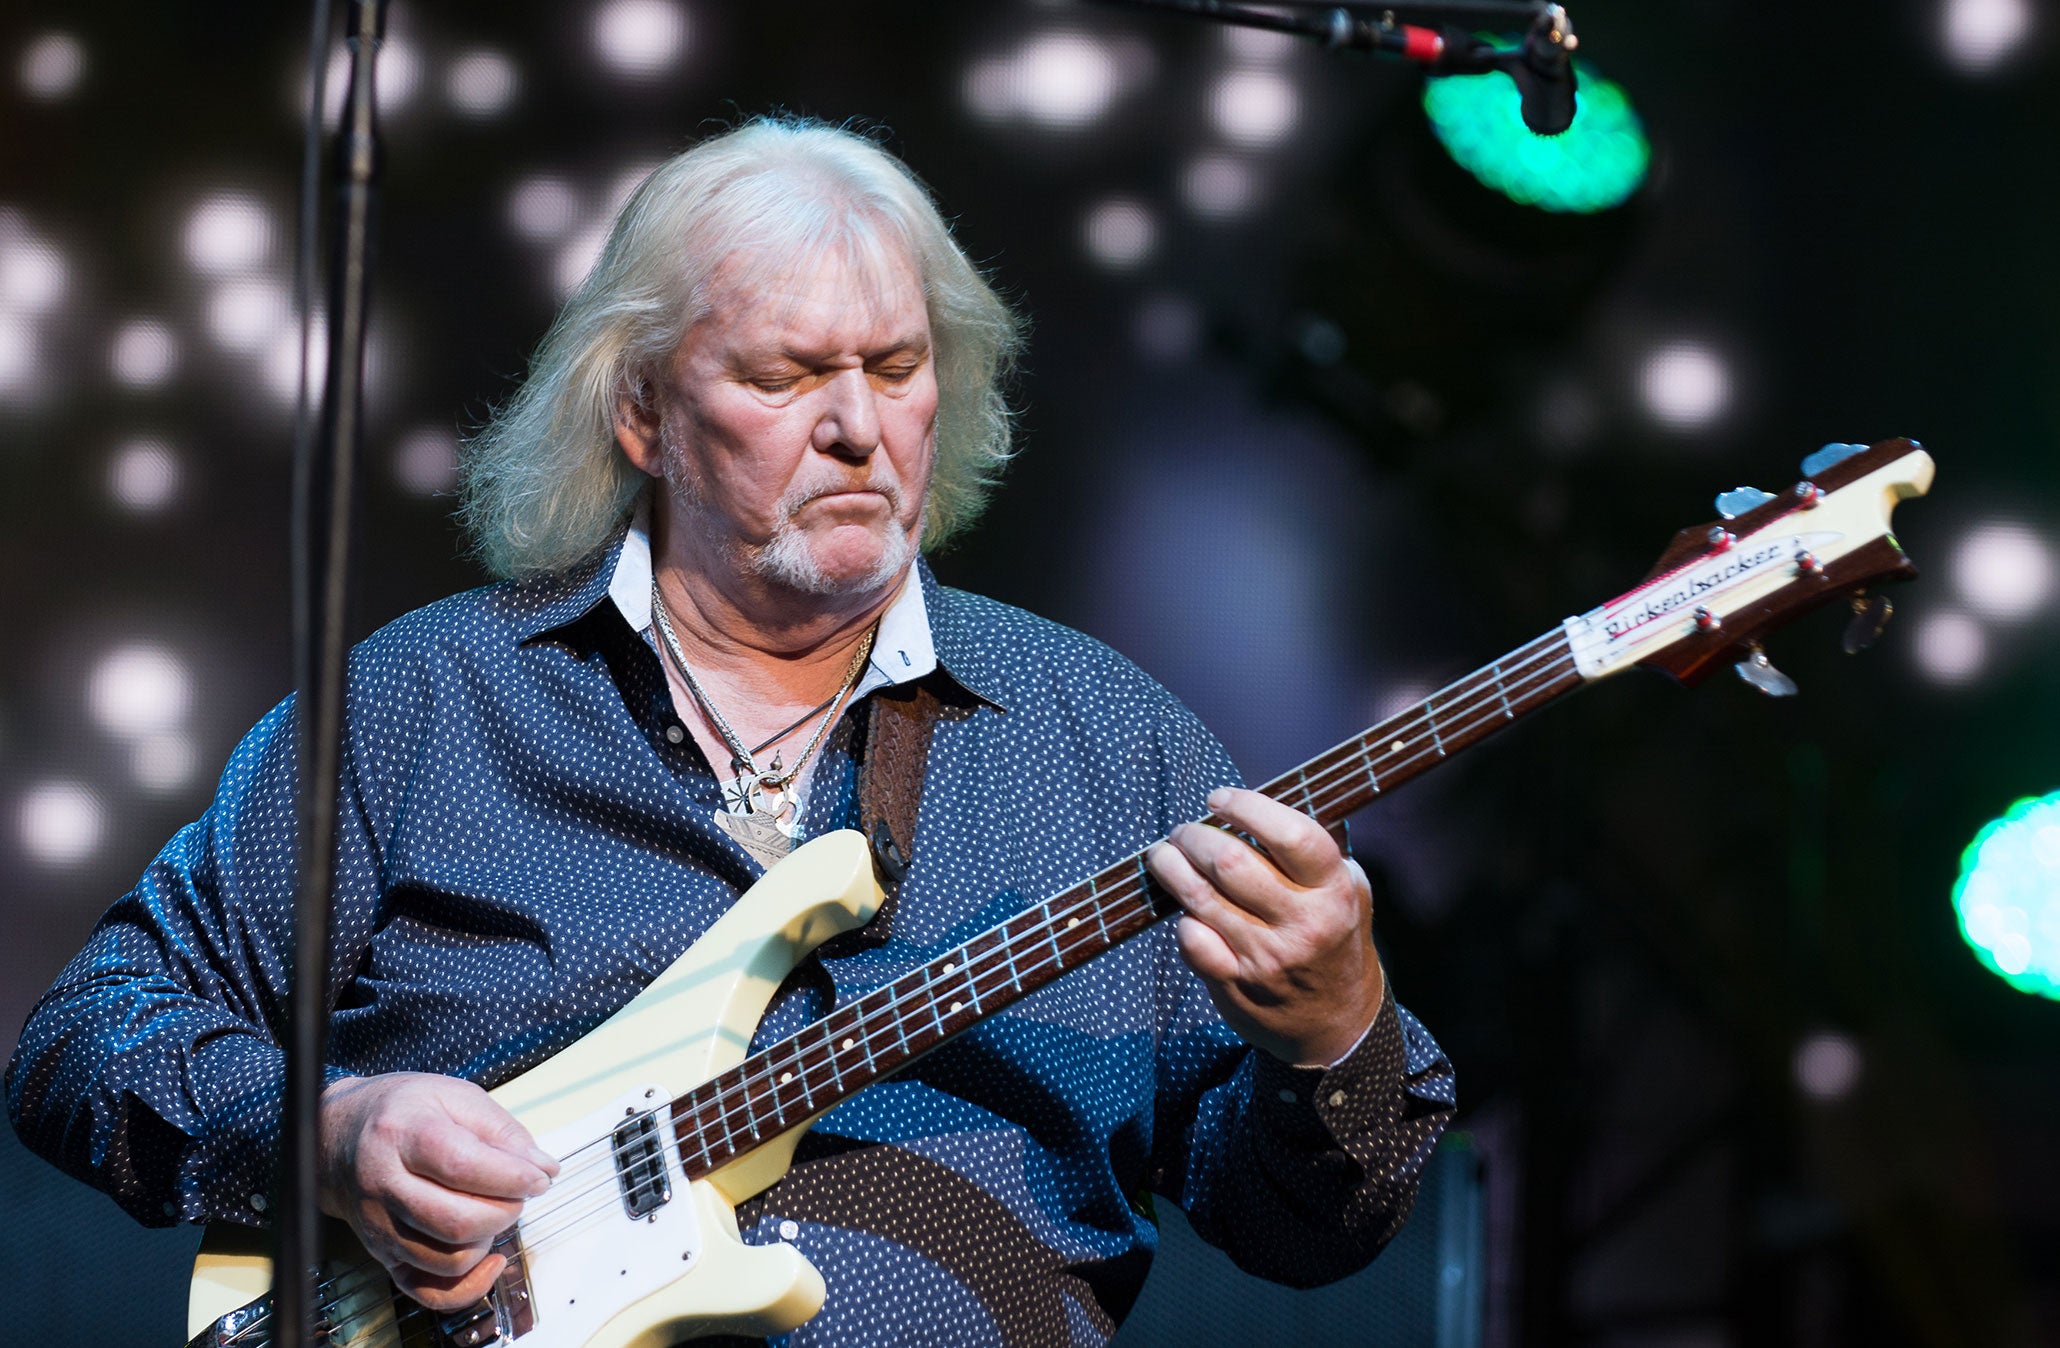 Chris Squire of the British band Yes performs at Radio City Music Hall on July 9, 2014 in New York City